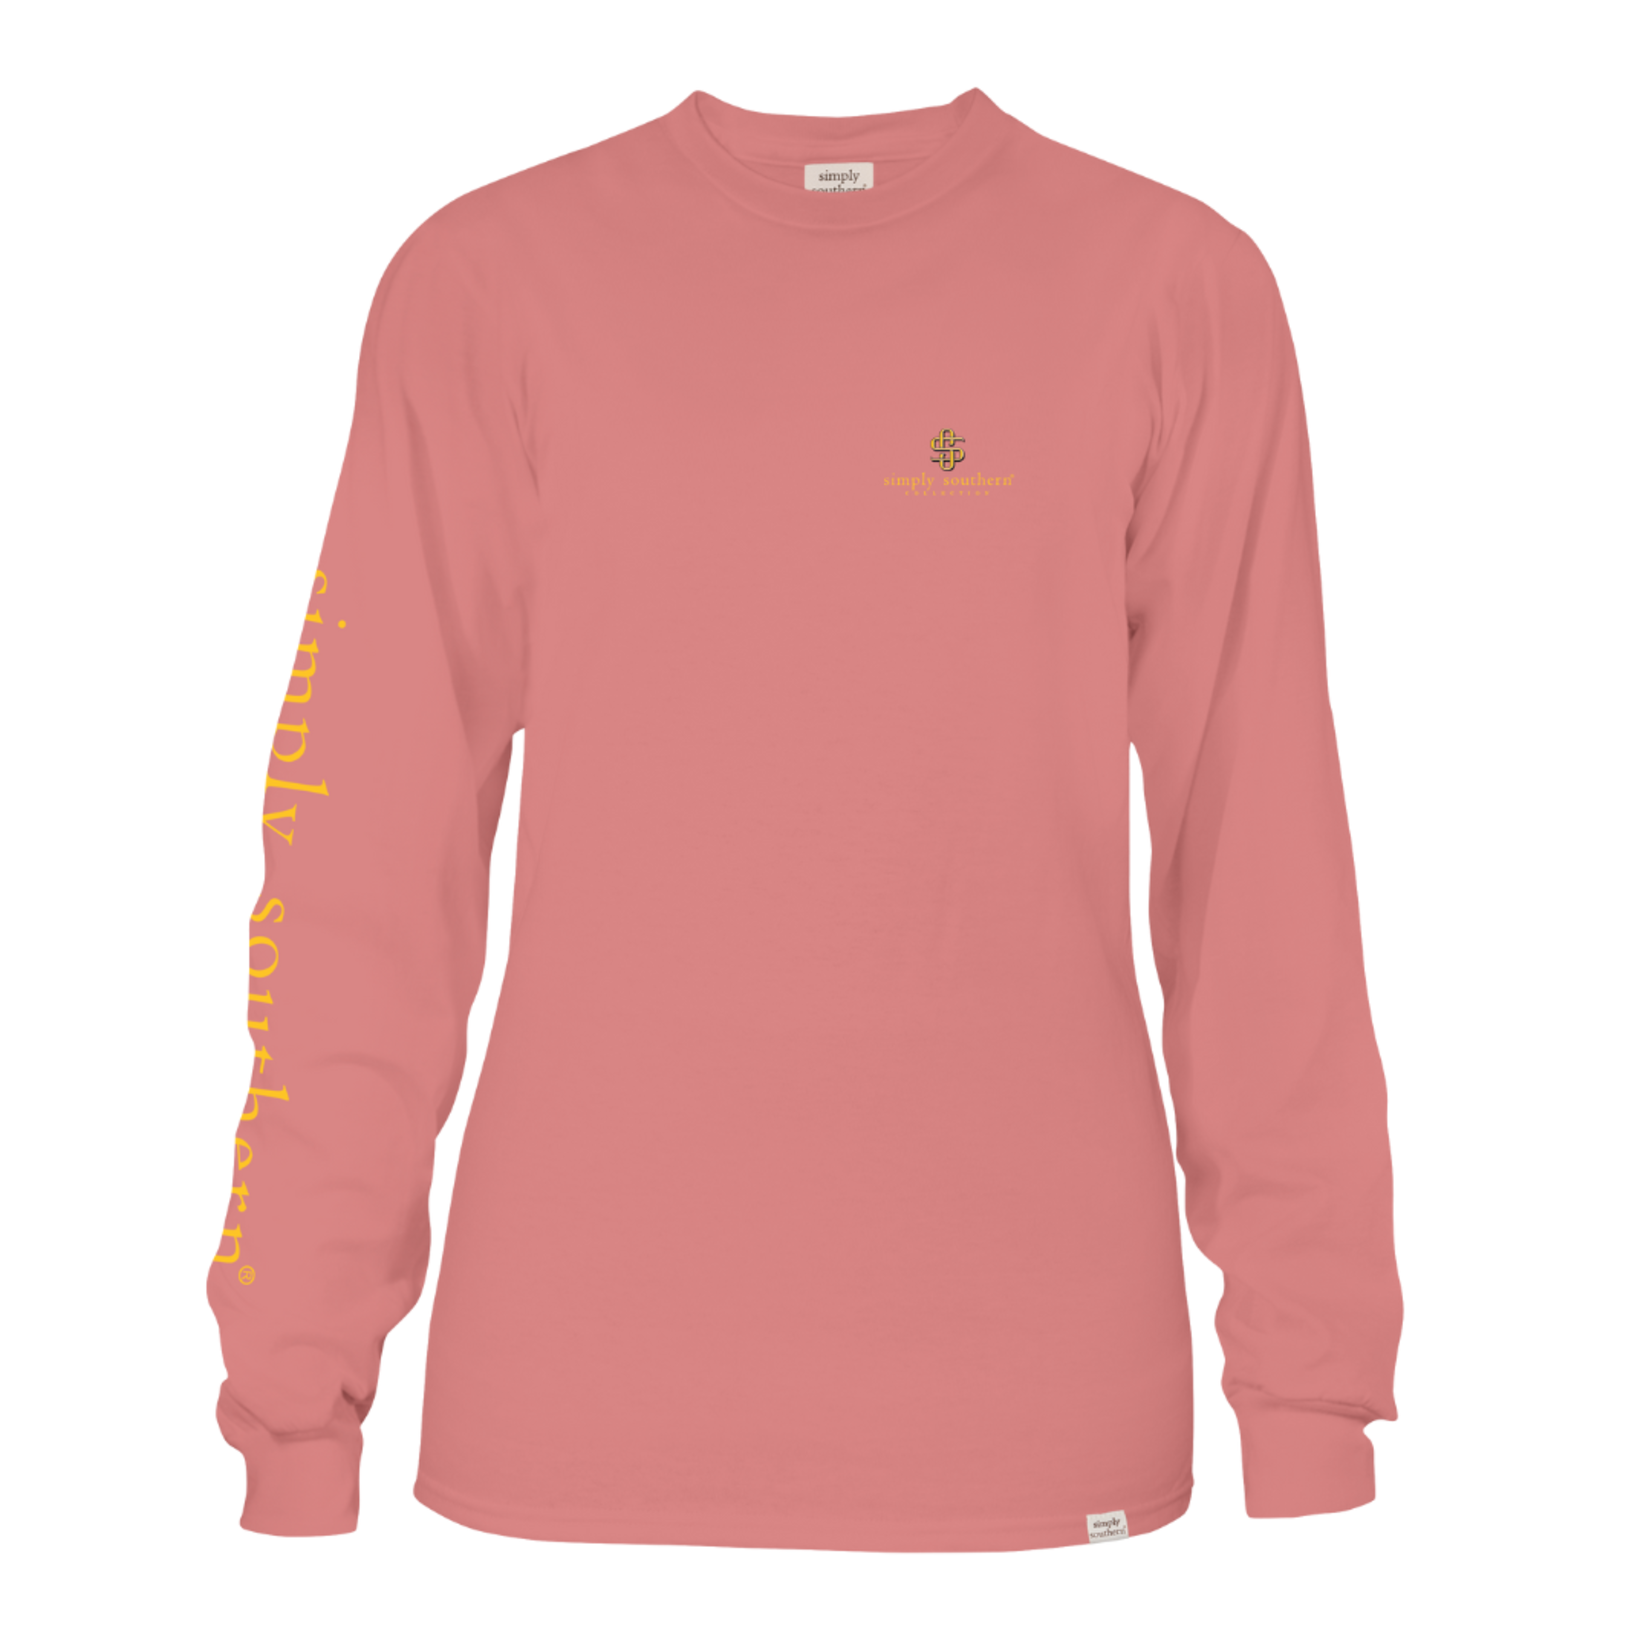 Simply Southern YOUTH LS CAT Rouge